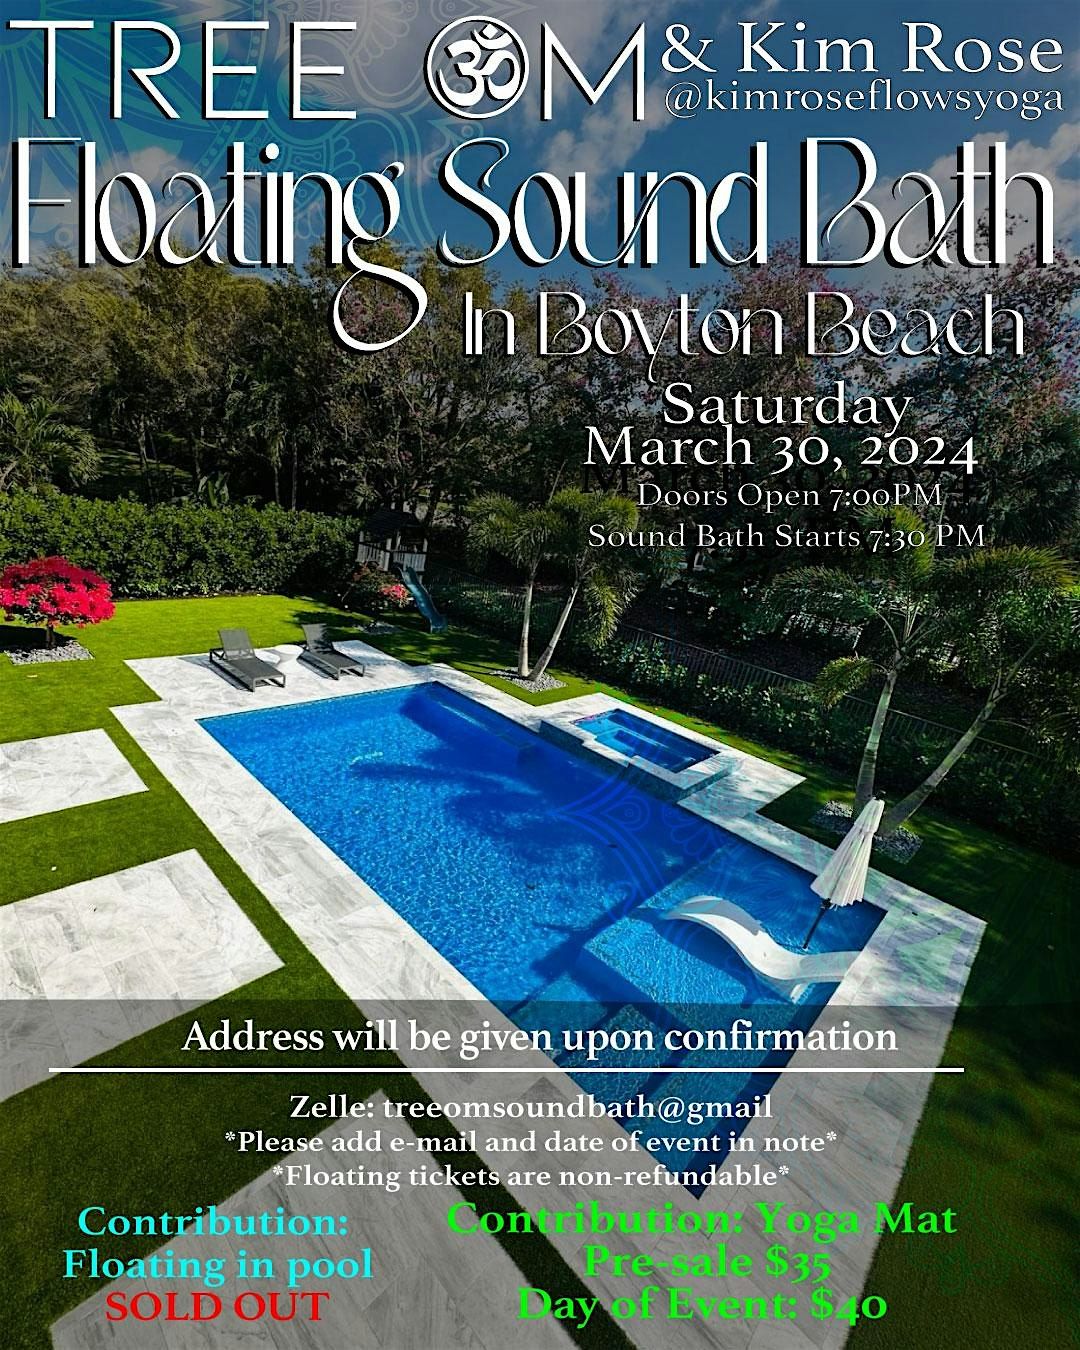 Floating Sound Bath - Floats SOLD OUT - Lay on a yoga mat around the pool